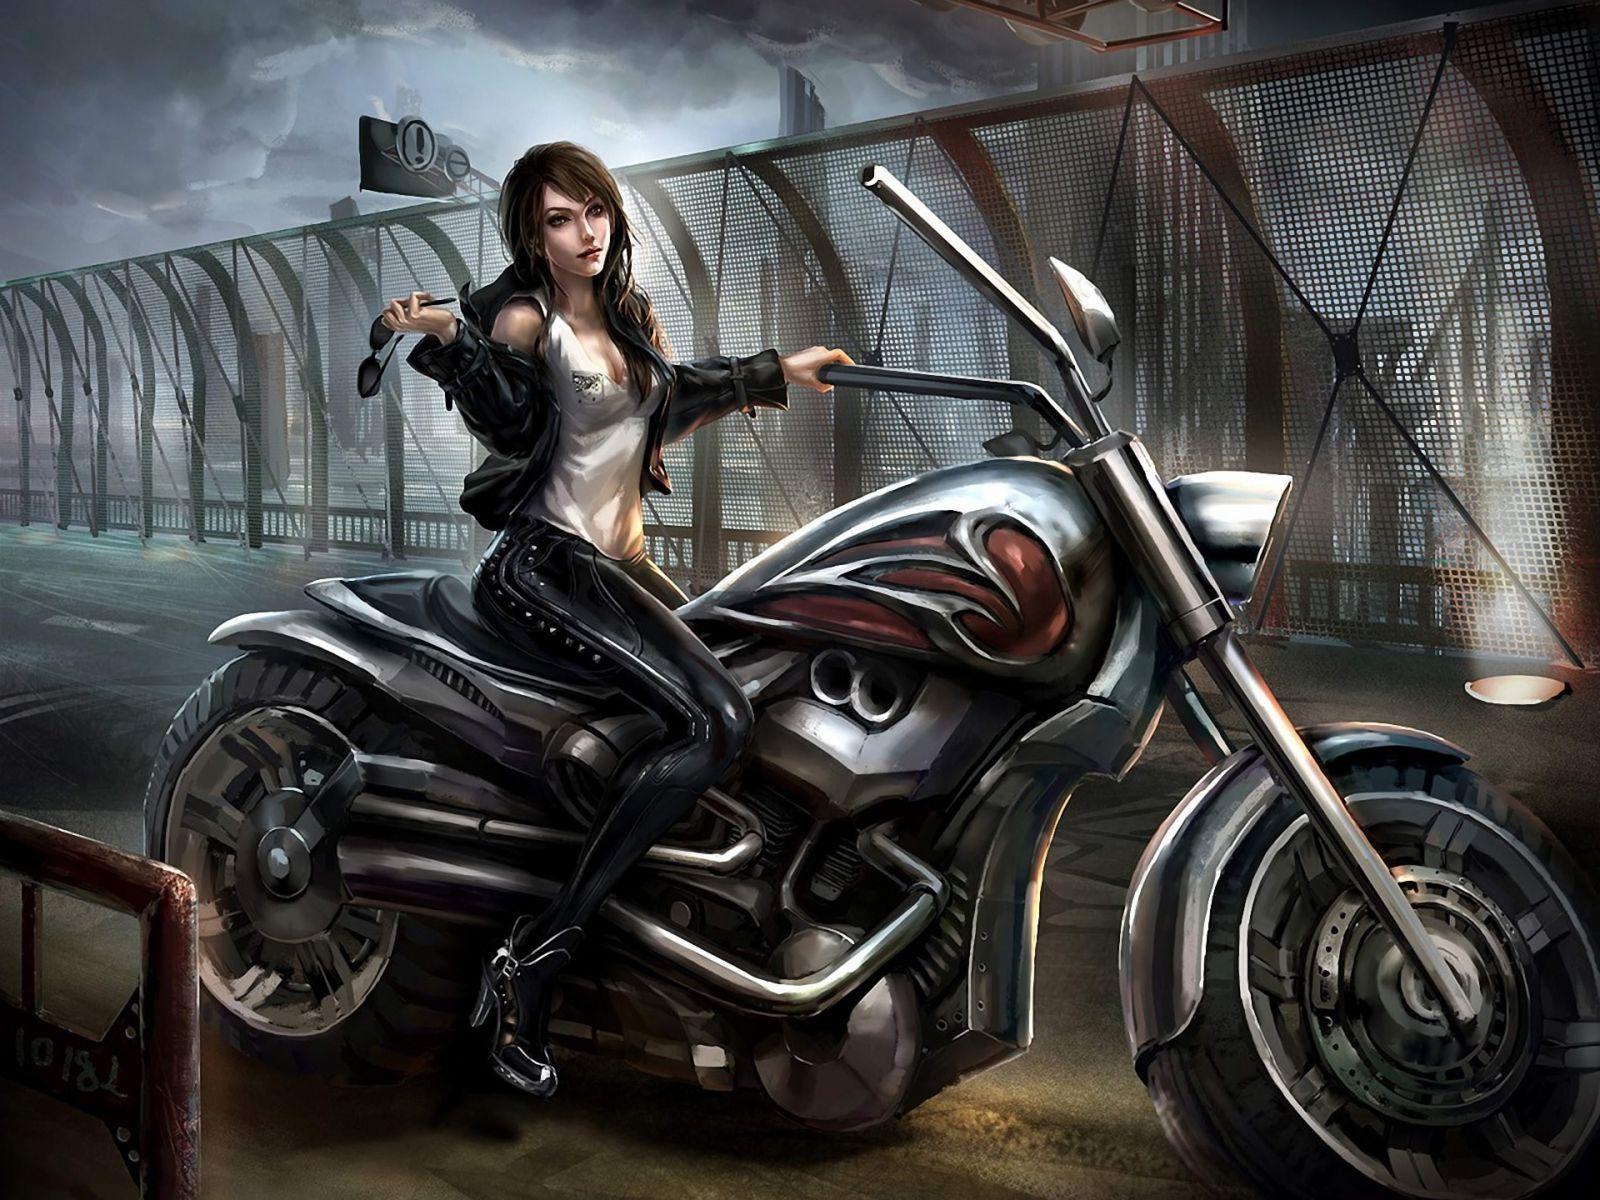 Anime Motorcycle Wallpaper Free Anime Motorcycle Background